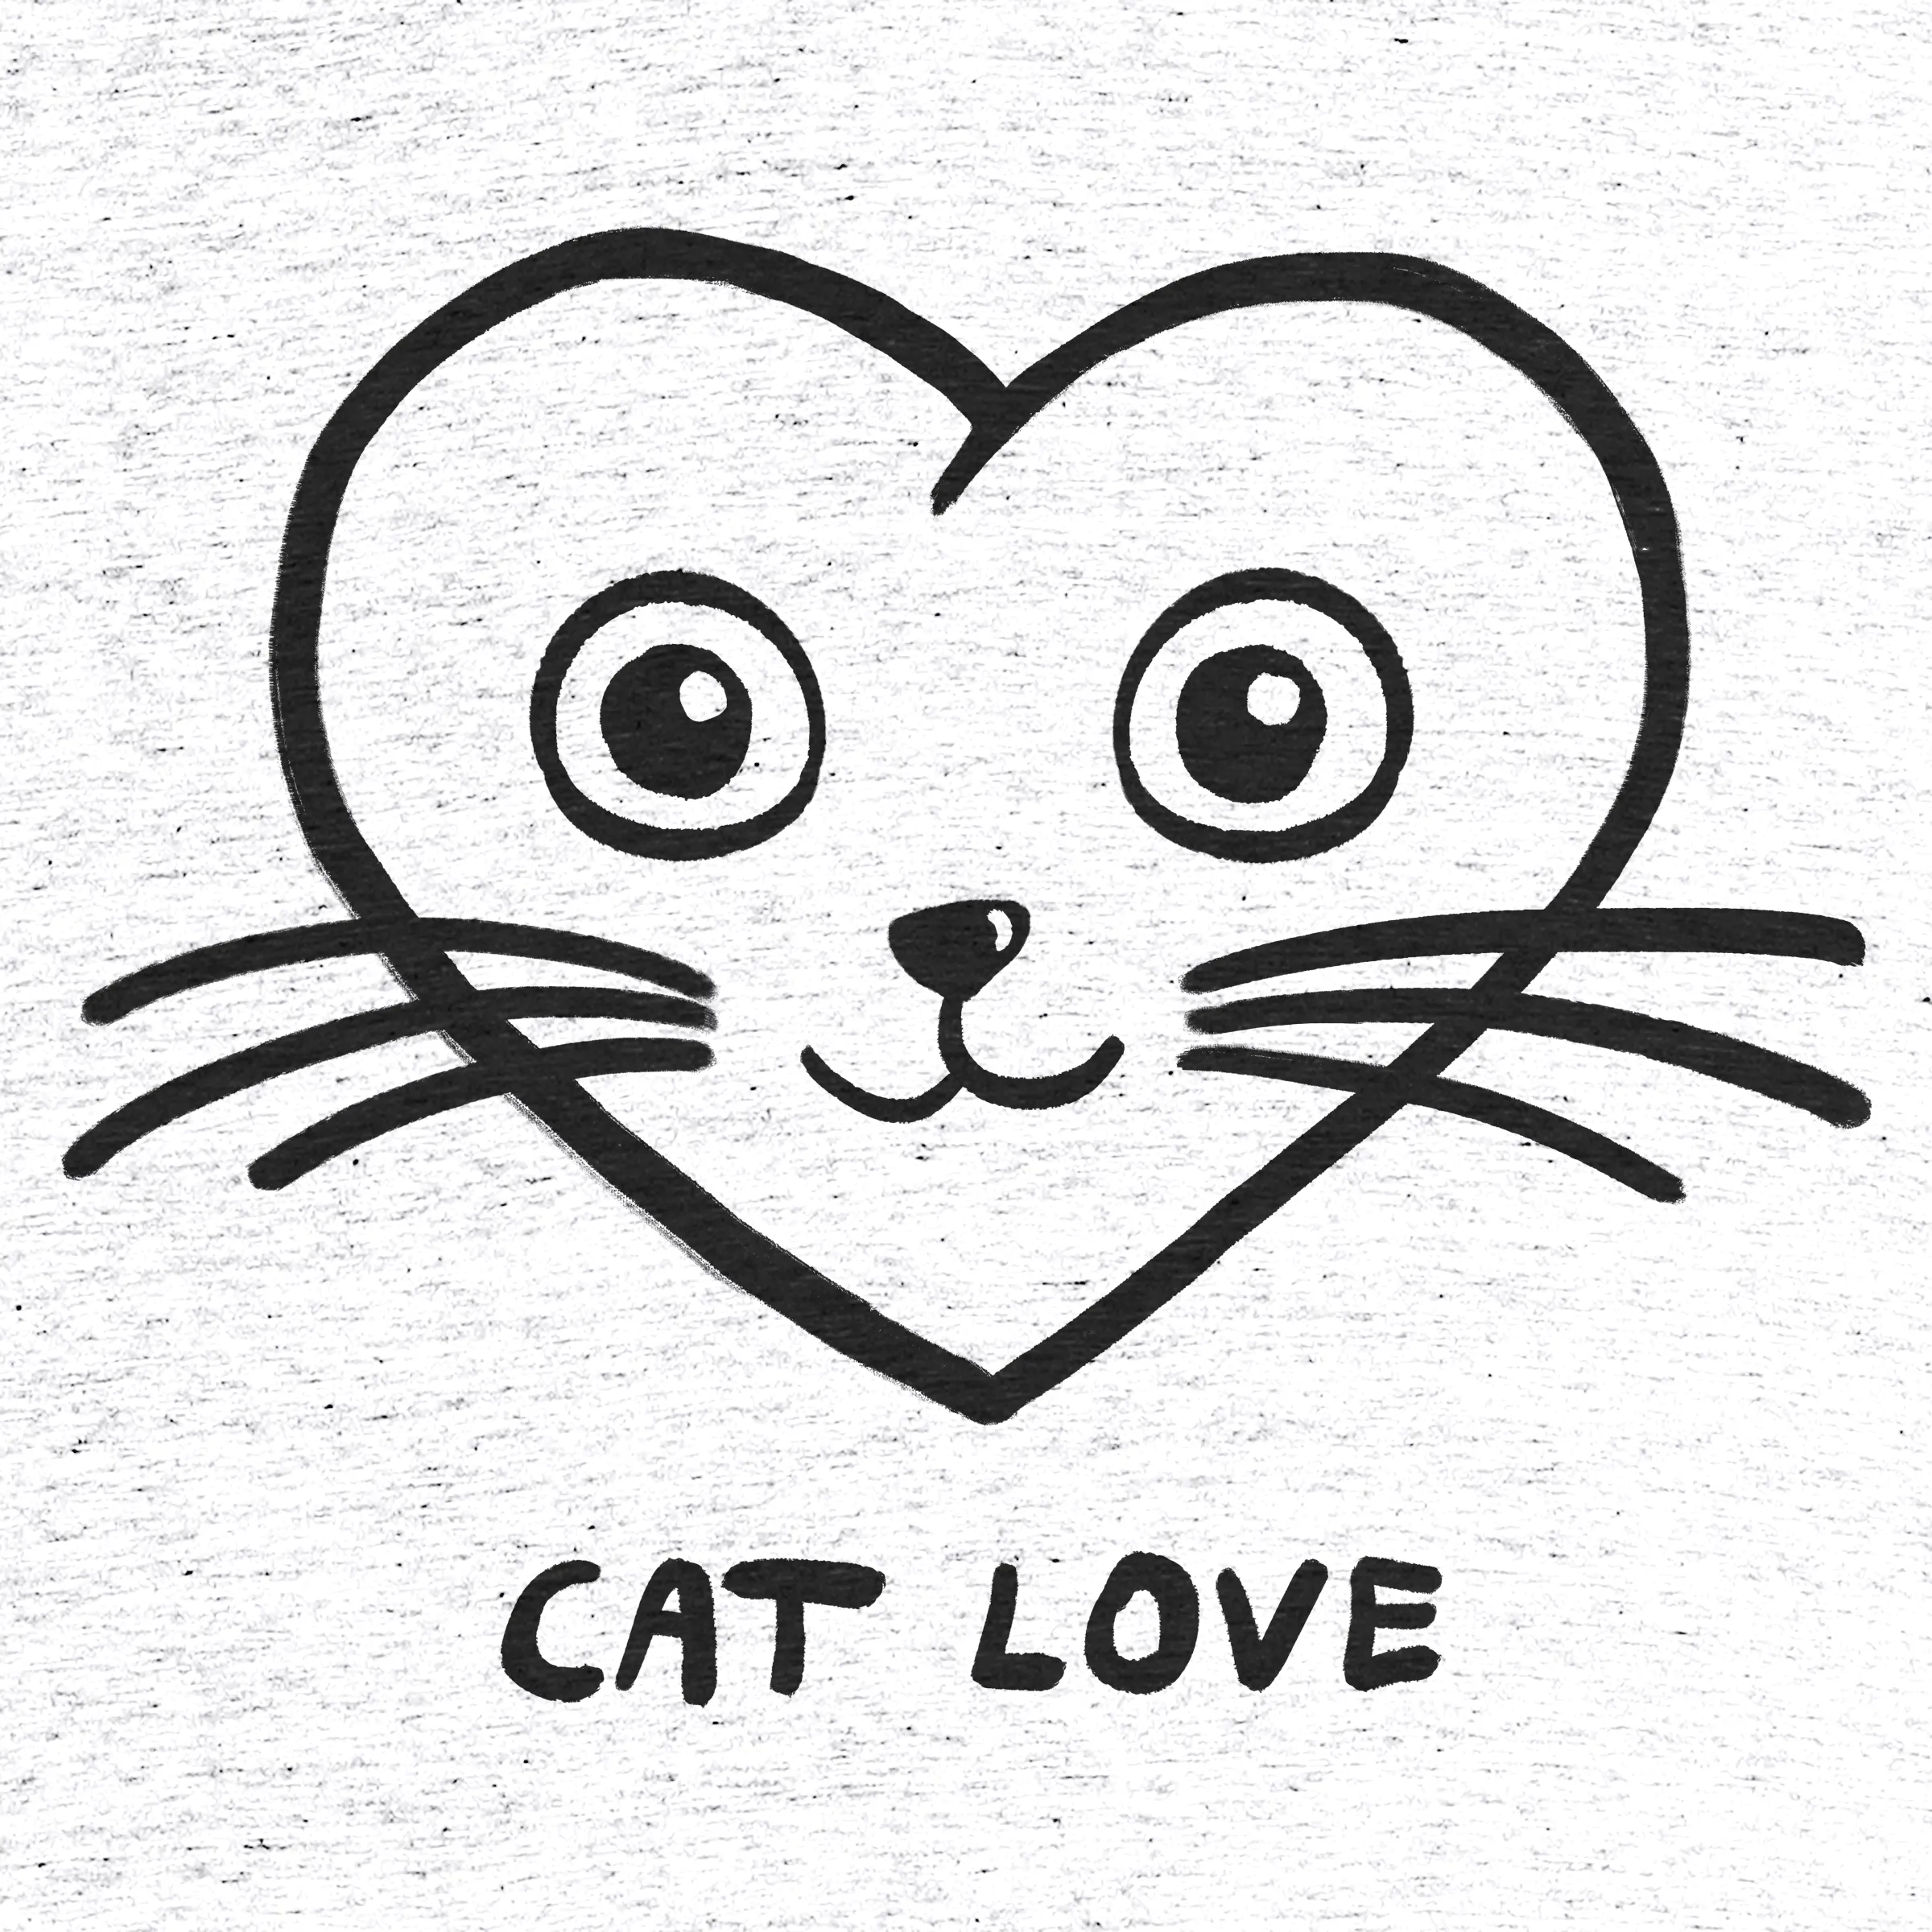 Cat Love Cats Kitten Funny Cute Cat Lover Gift Graphic Kitty